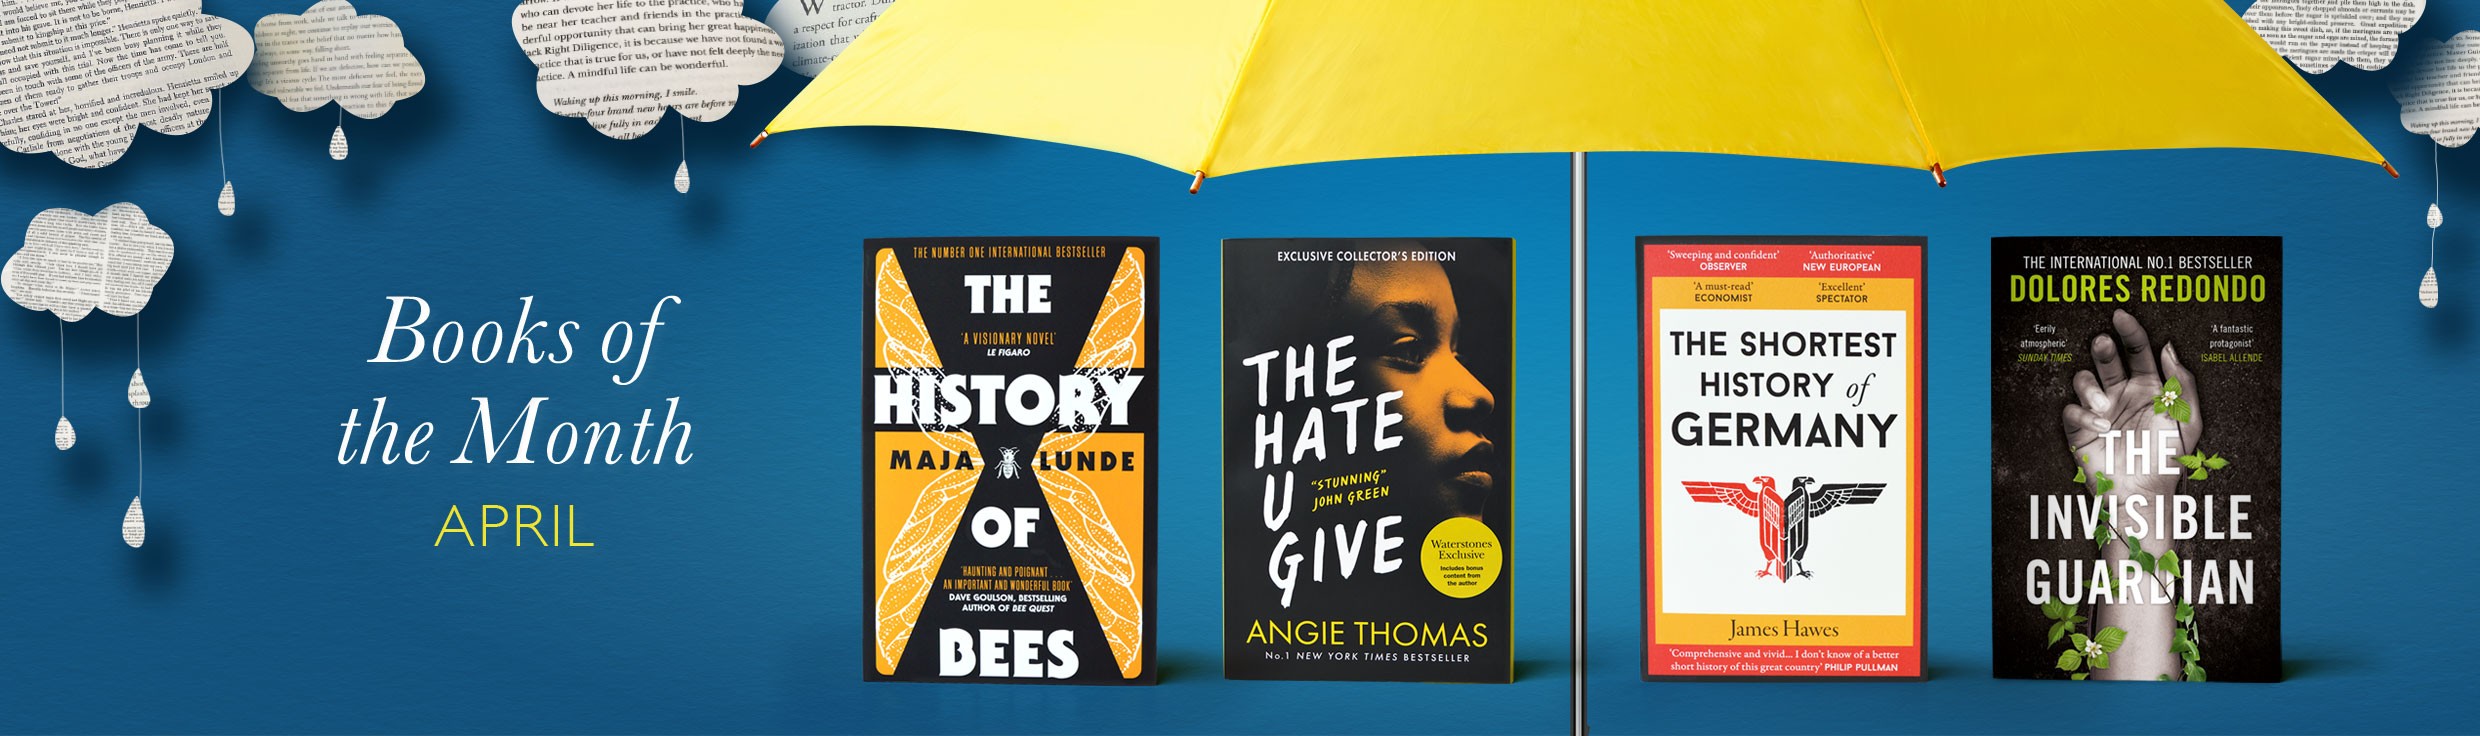 The Hub Presenting Your Books of the Month for April The Hub